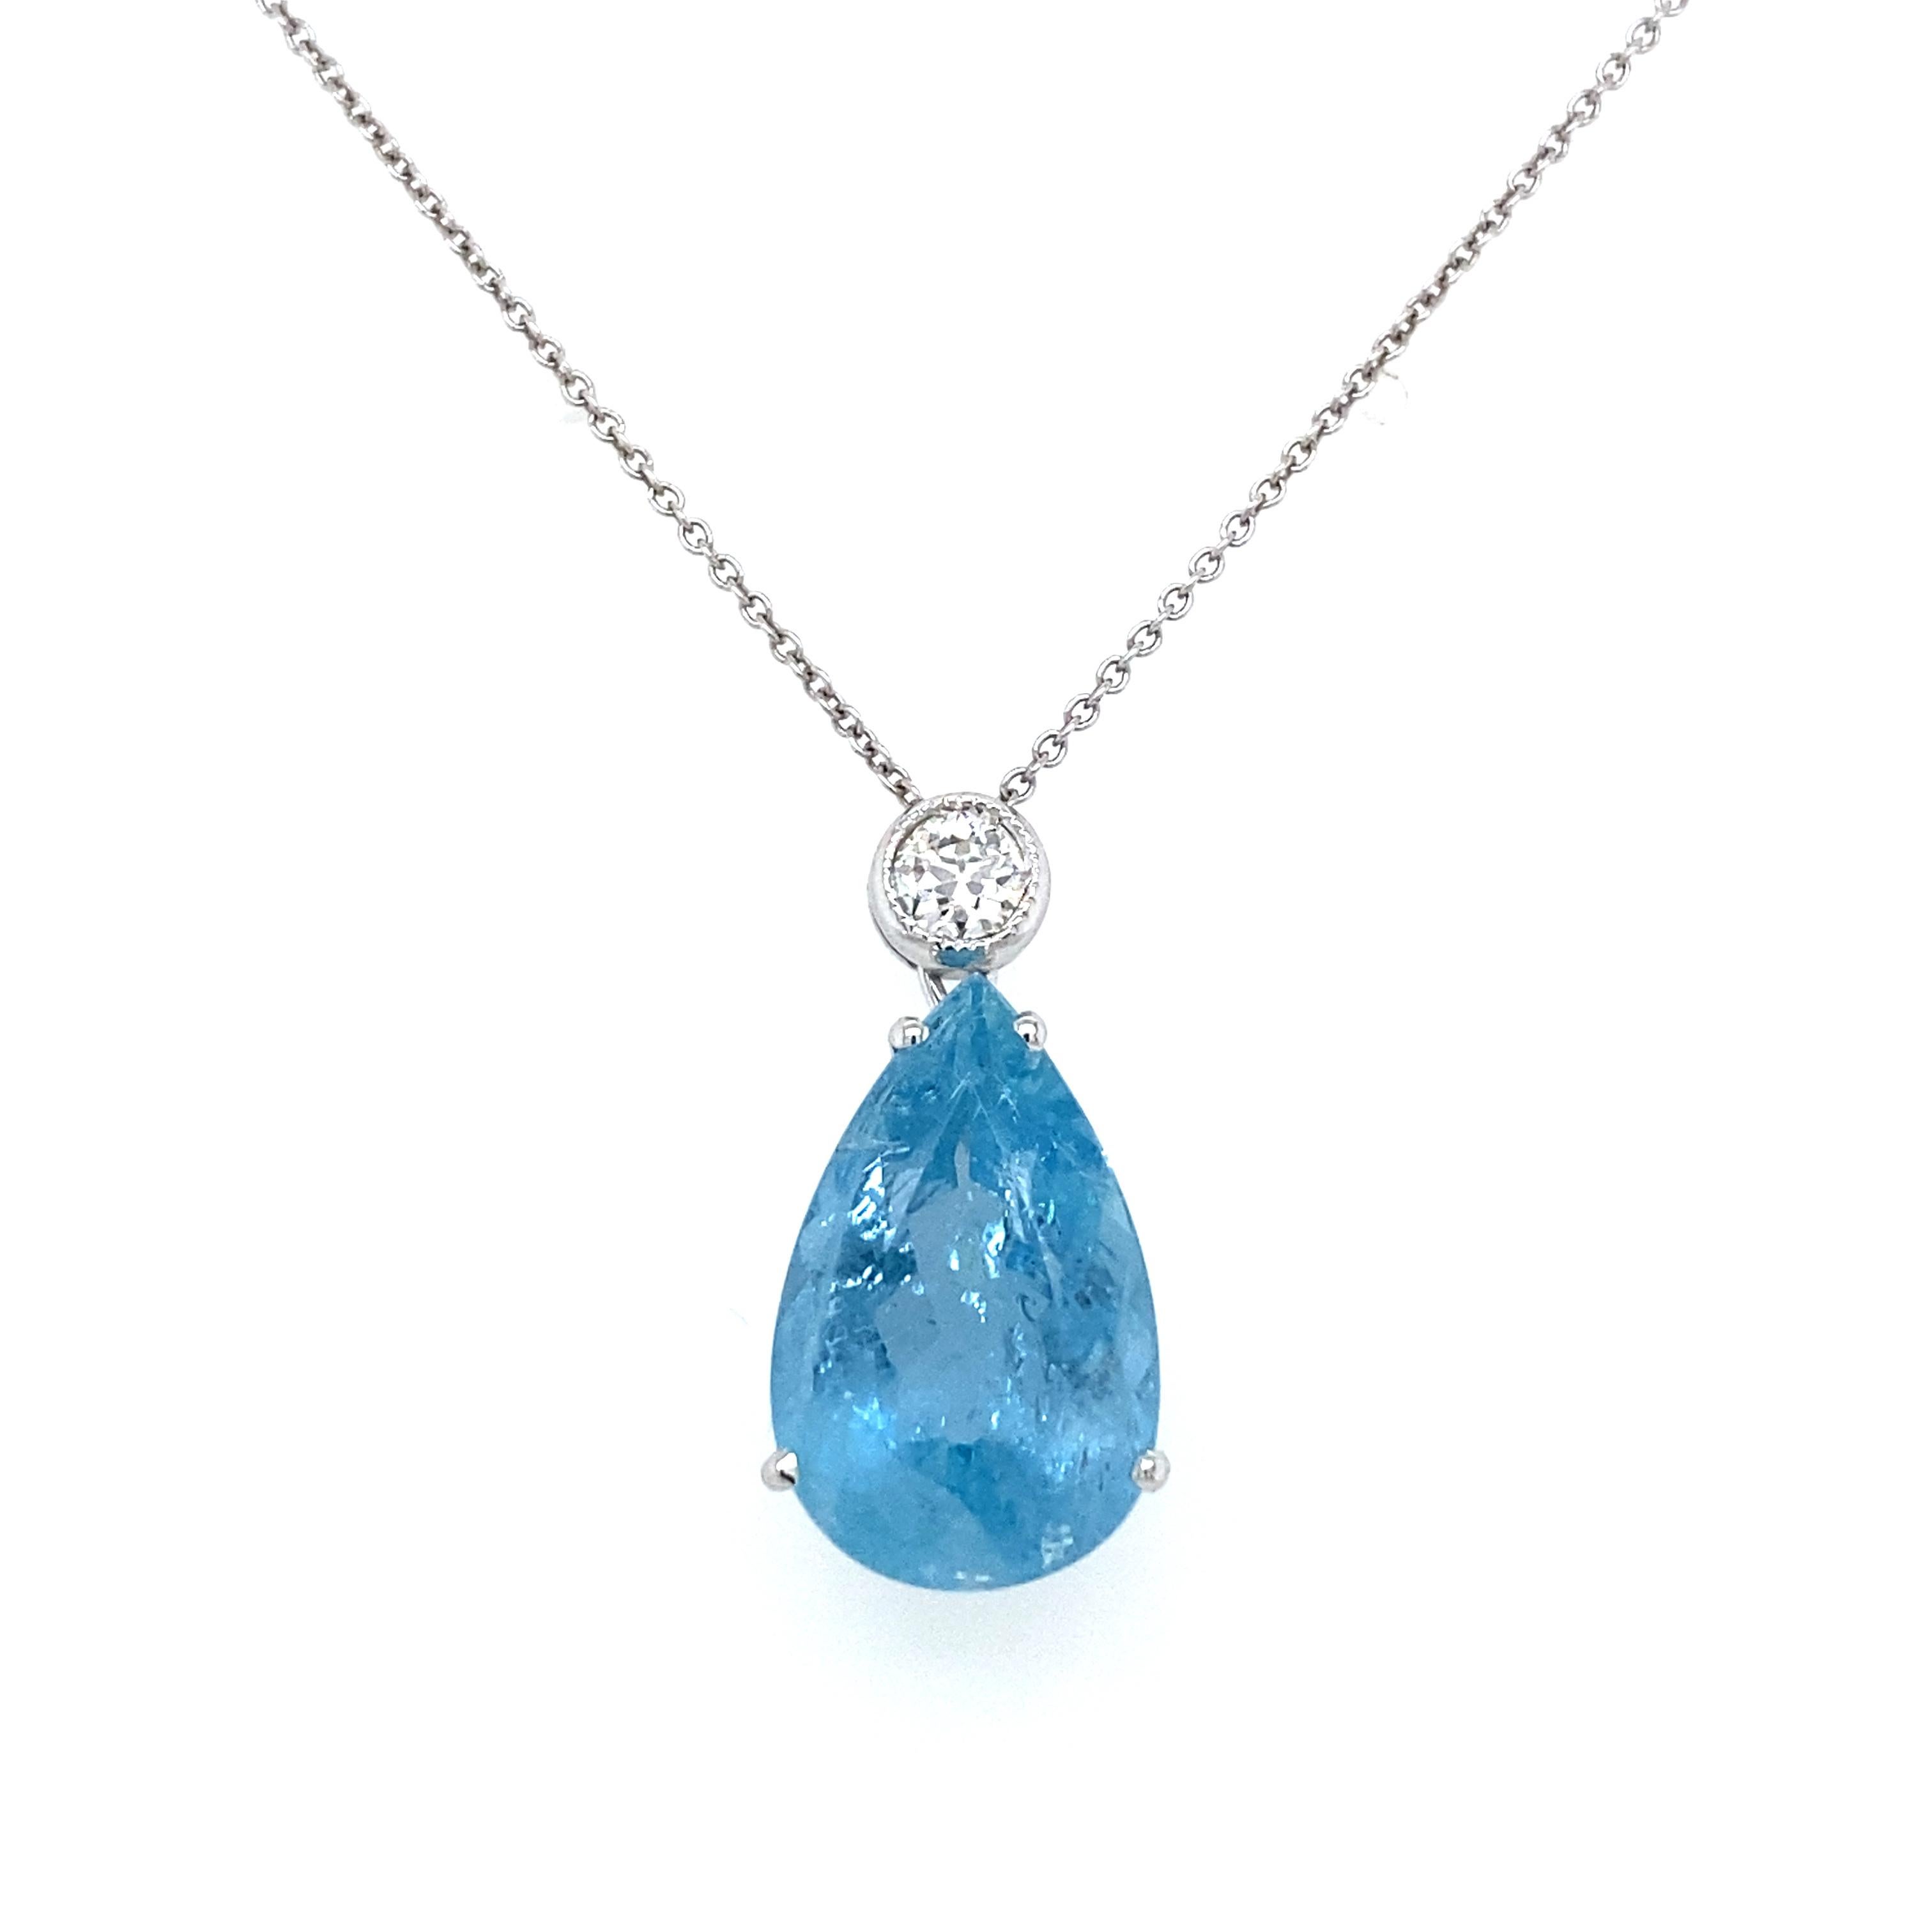 An impressive vintage 1960's 18k white gold necklace set with one large exquisite pear shape Natural Aquamarine, for a total weight of 7,20 Carats, surrounded by one large old mine cut Diamond in a white gold setting, weight 0,35 carats, graded H/I